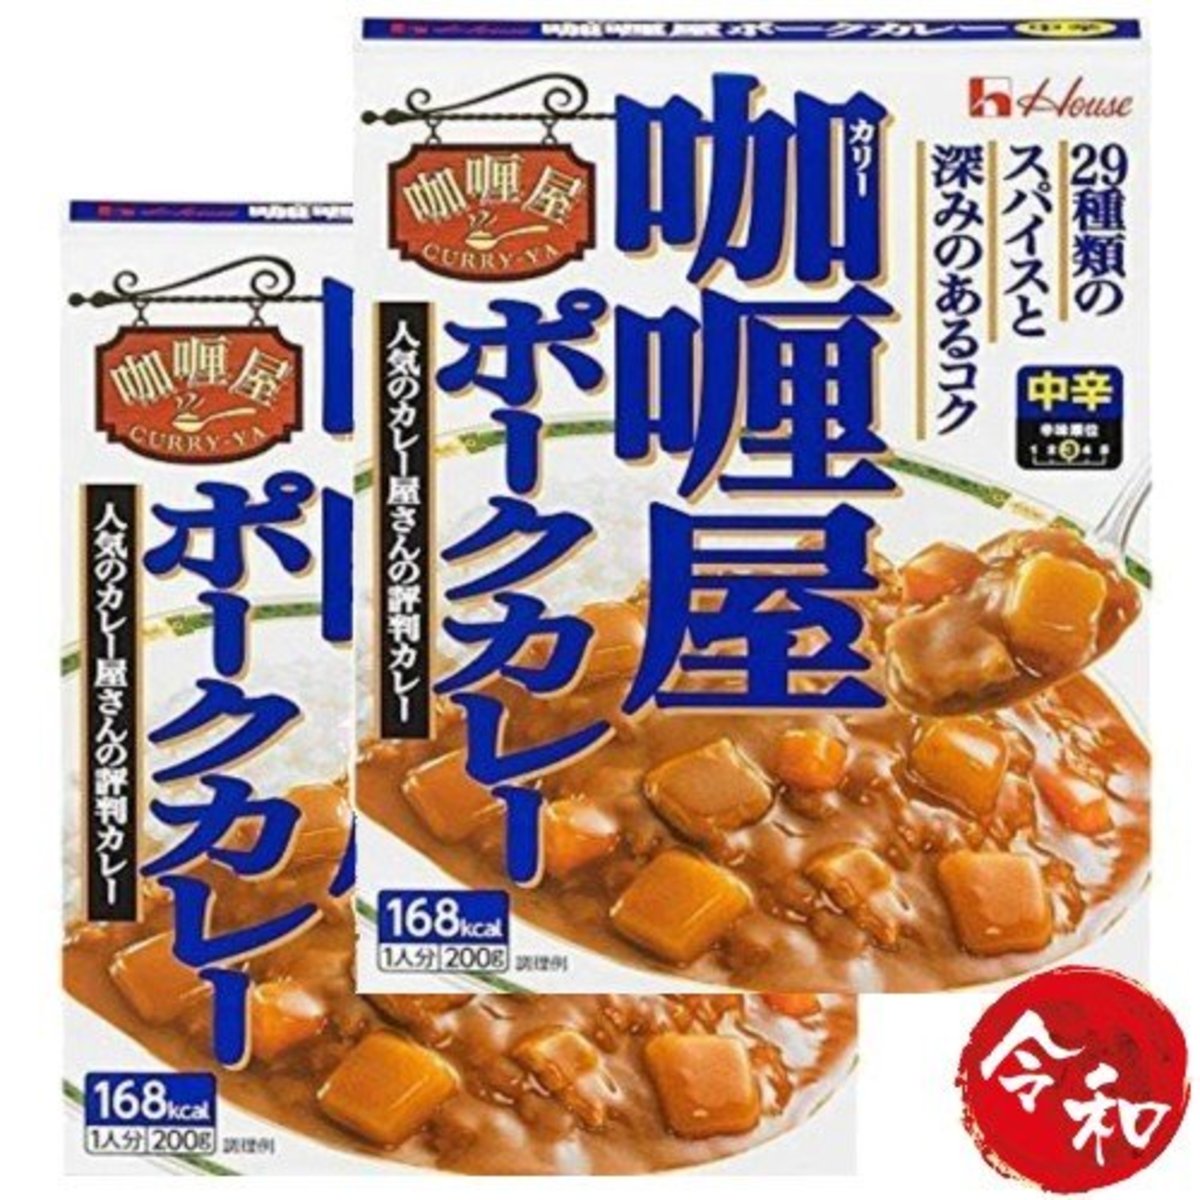 House Foods 2 Boxes Curry House Pork Curry Medium Spicy 200g Japan Direct Delivery Hktvmall Online Shopping